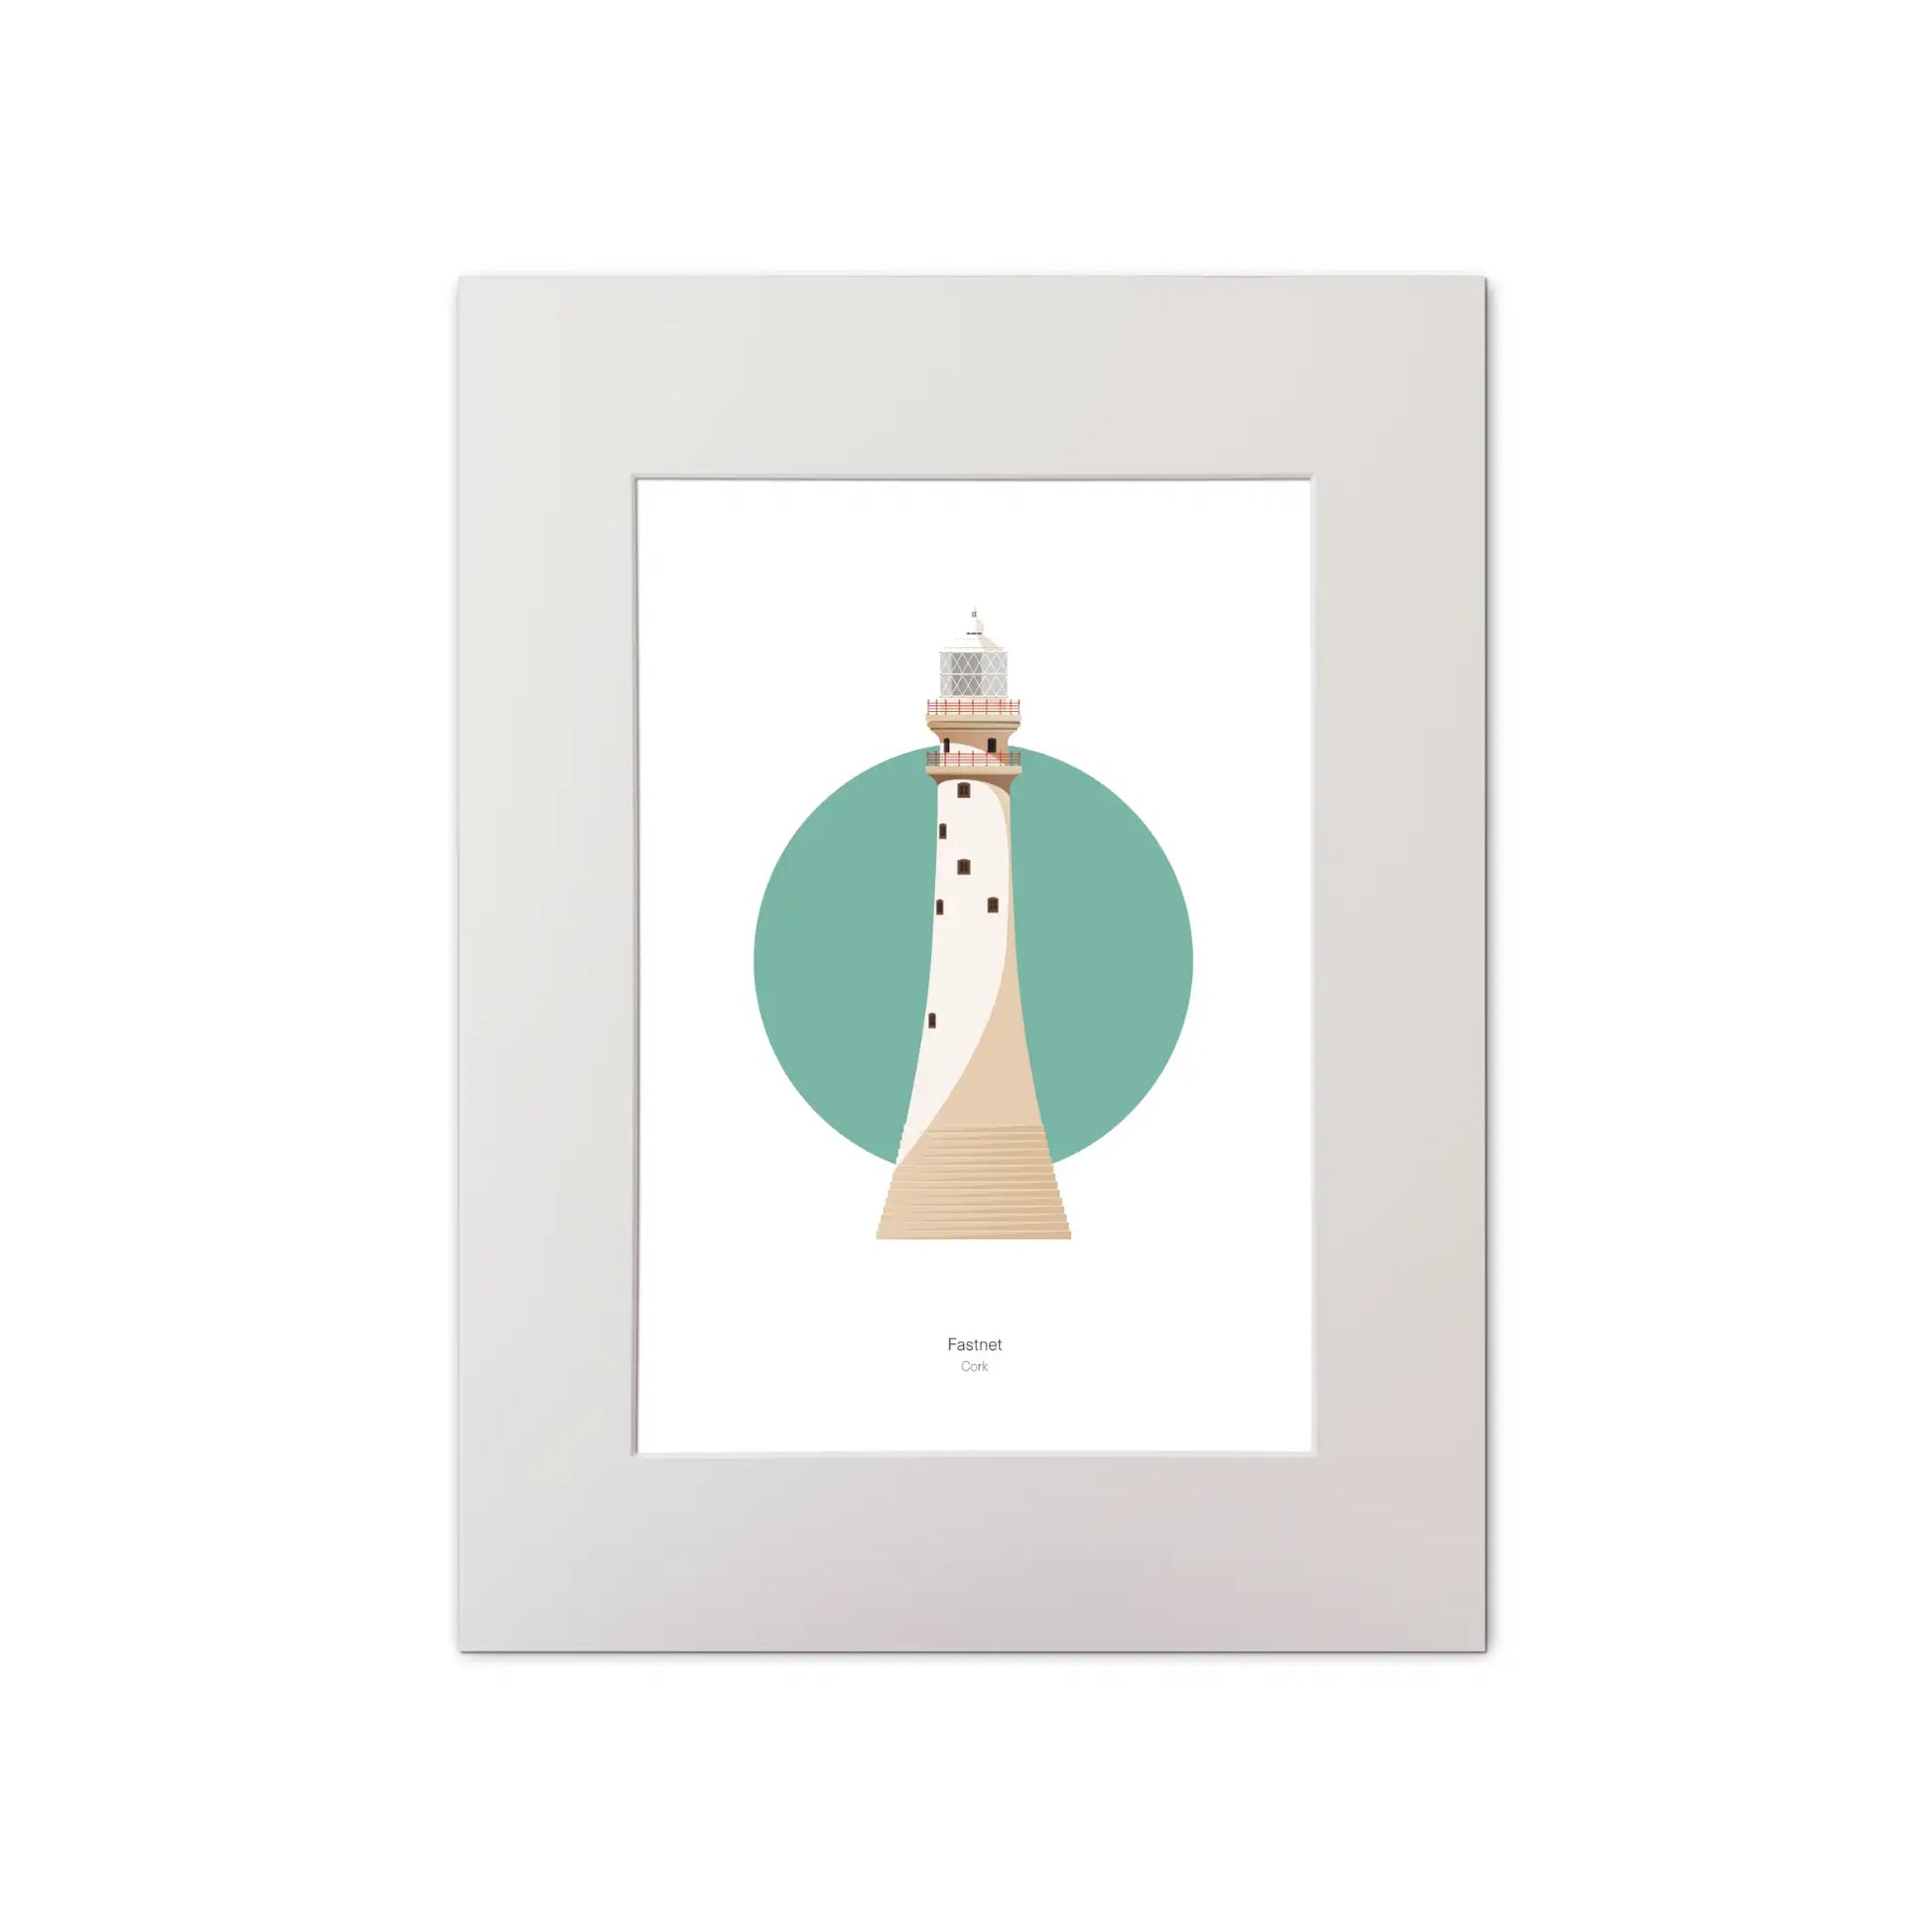 Illustration of Fastnet lighthouse on a white background inside light blue square, mounted and measuring 30x40cm.